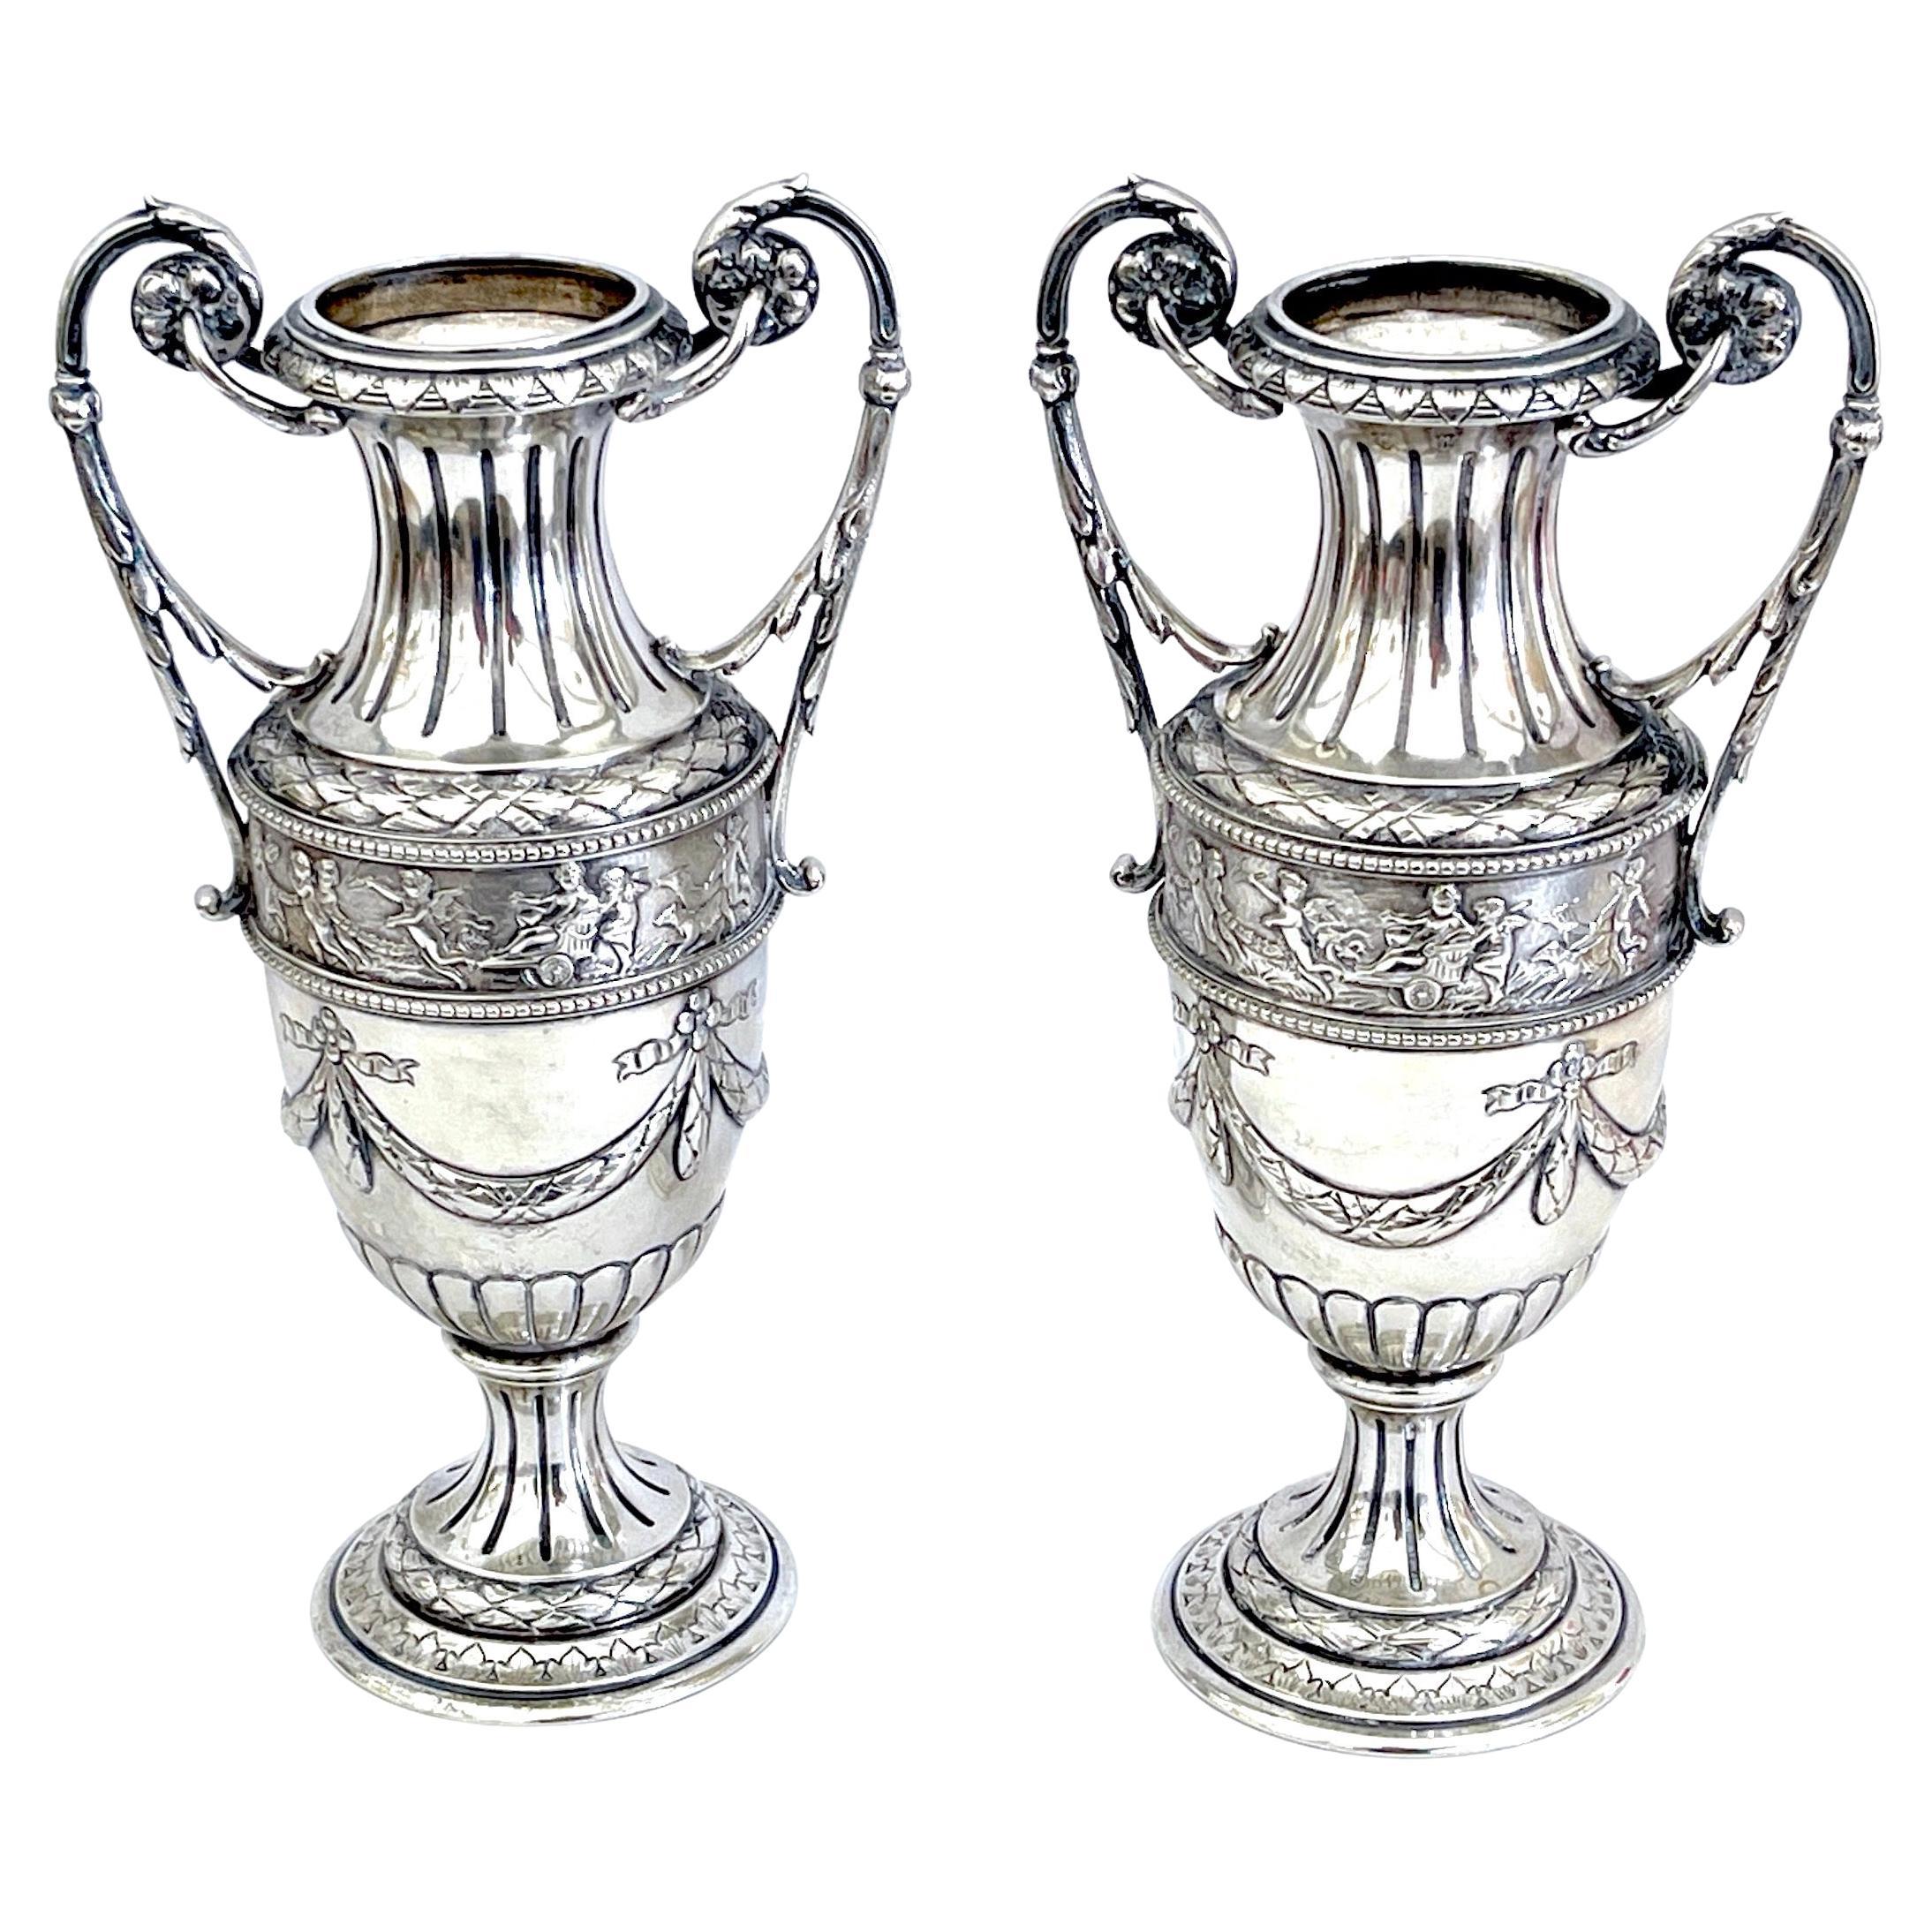 Pair of 18th Century Italian Silver Neoclassical Vases, In the Louis XVI Style 
Each vase Hallmarked 
A rare and exquisite pair of 18th-century Italian Silver Neoclassical Vases, made in the Louis XVI style. This remarkable set comprises two